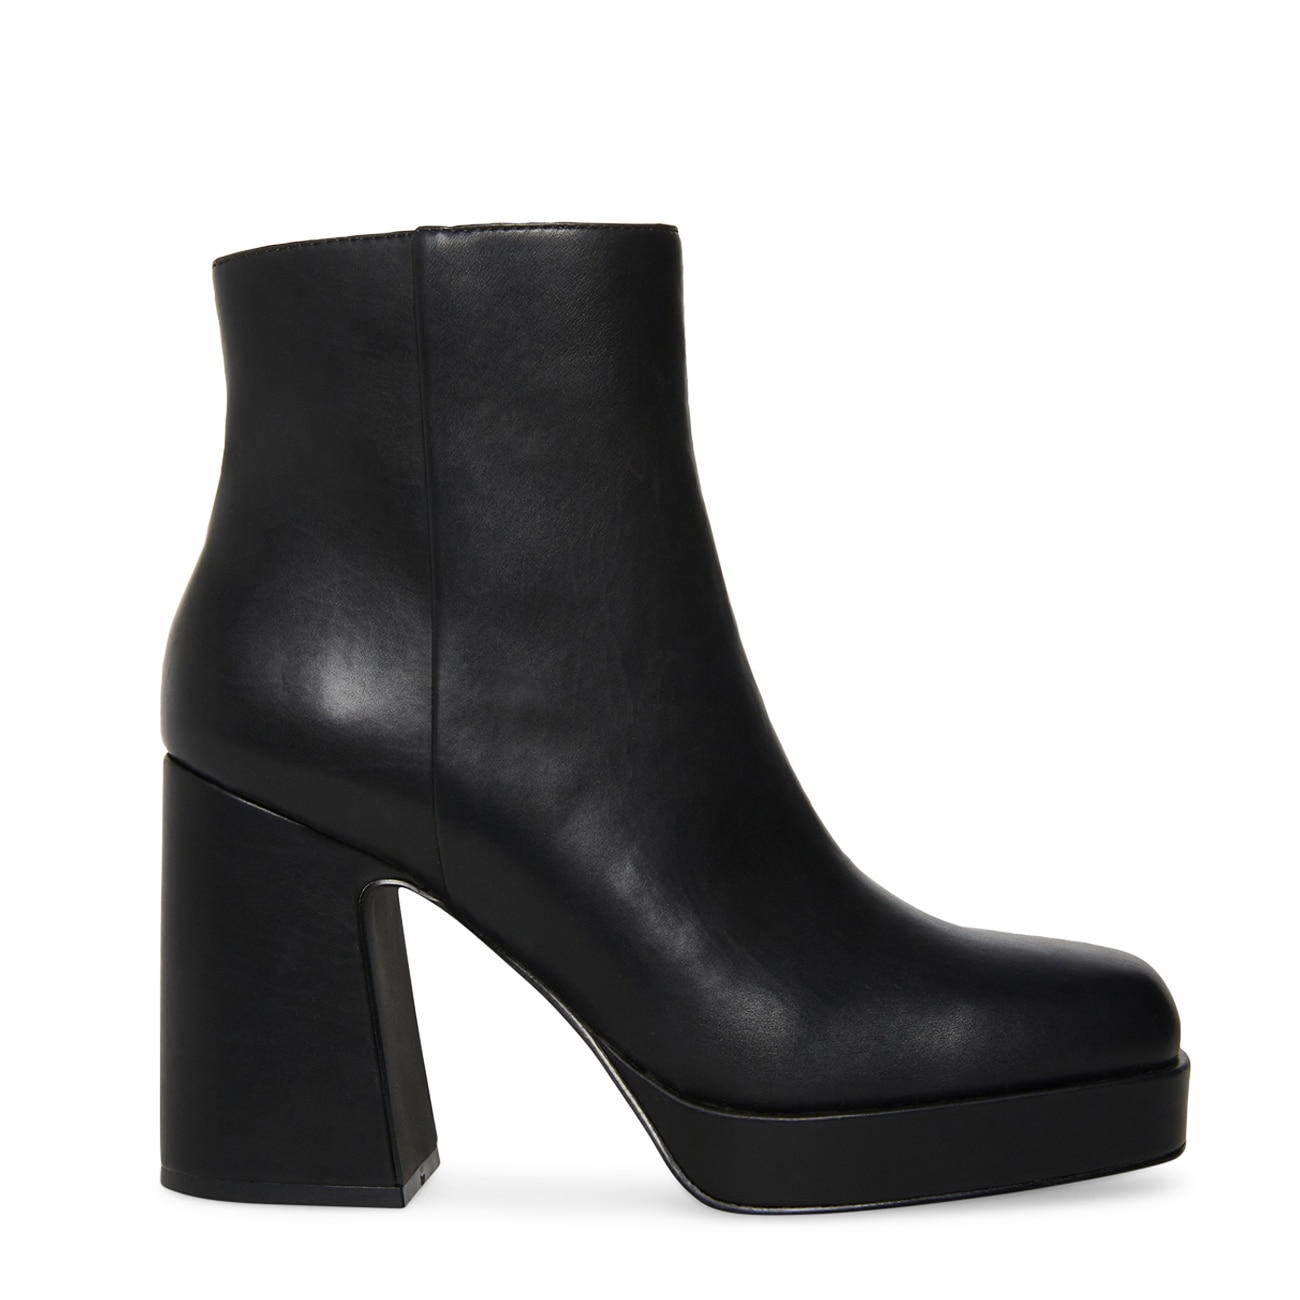 madden girl by Steve Madden Activate Ankle Bootie | The Shoe Company